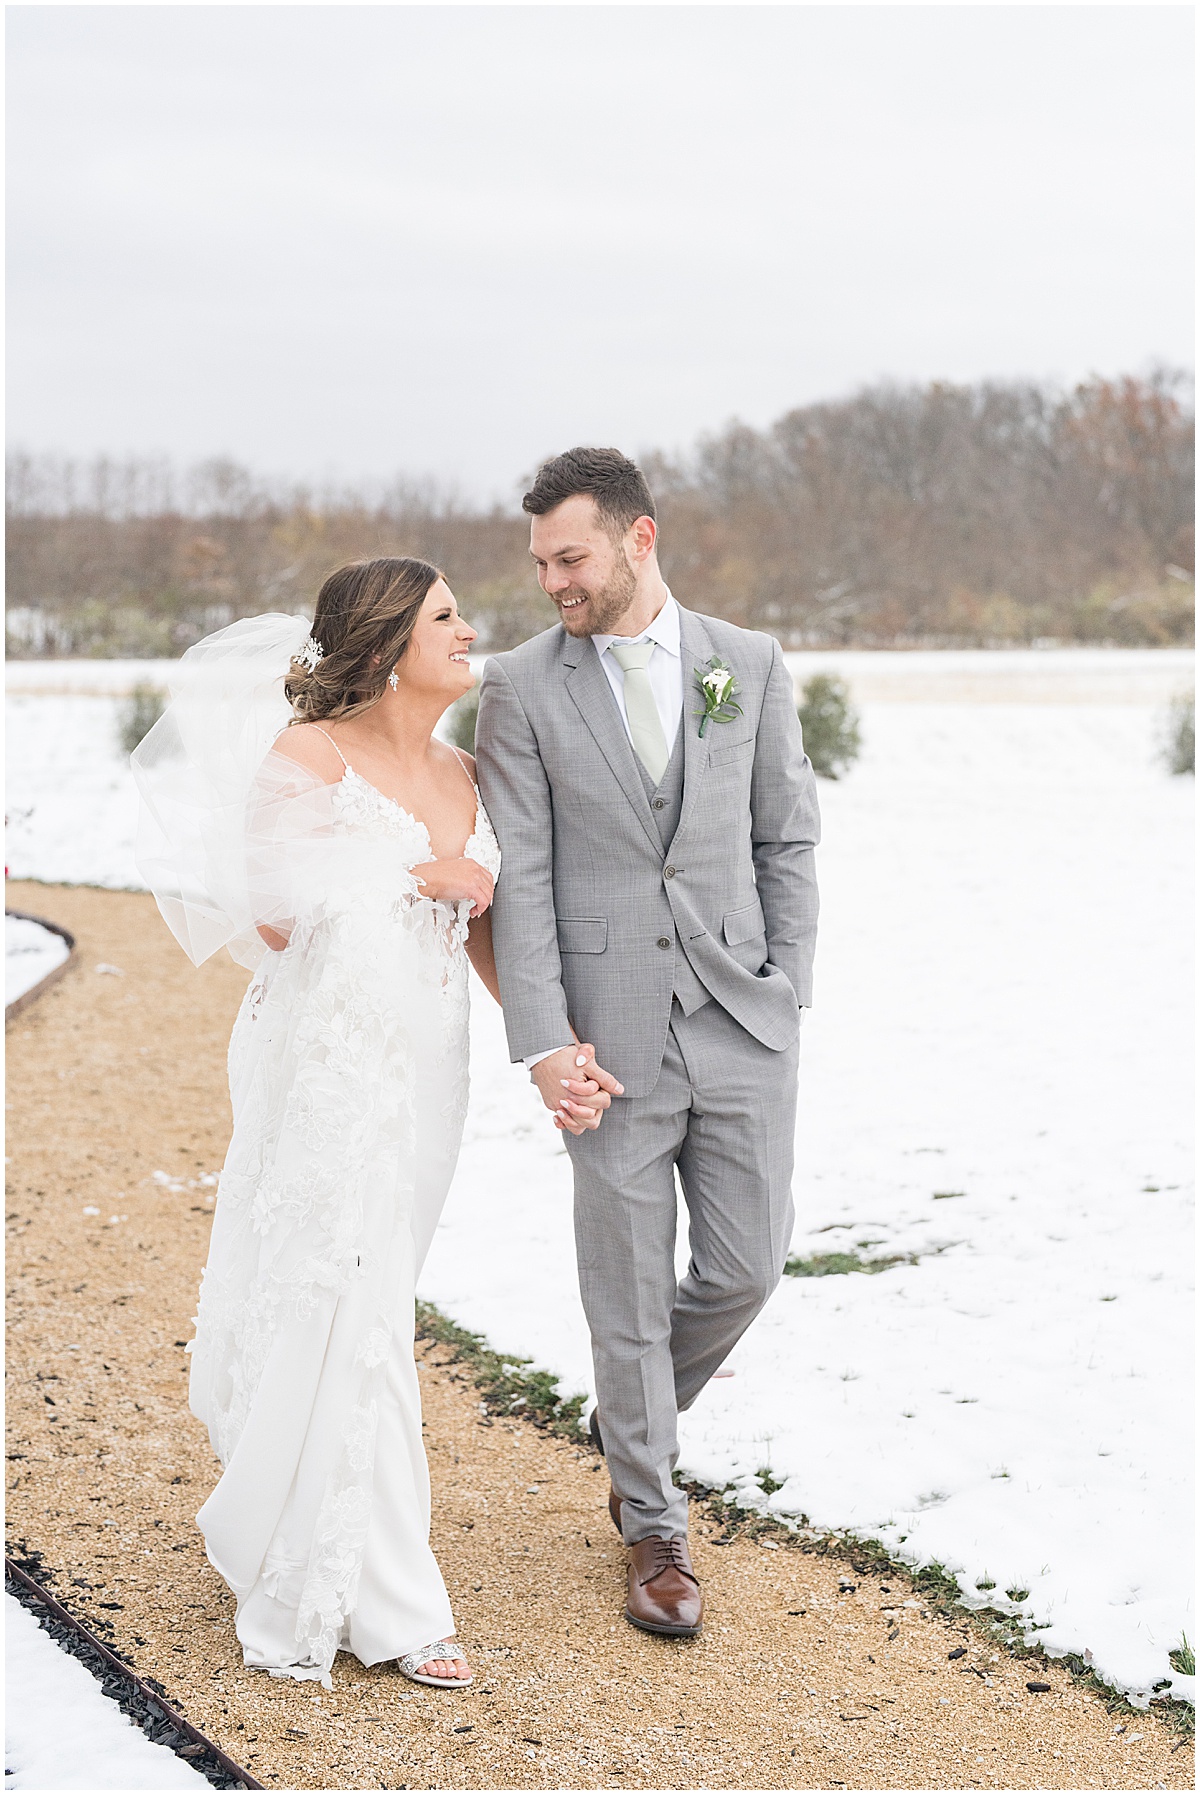 Bride and groom walk on snowy trail after wedding at New Journey Farms